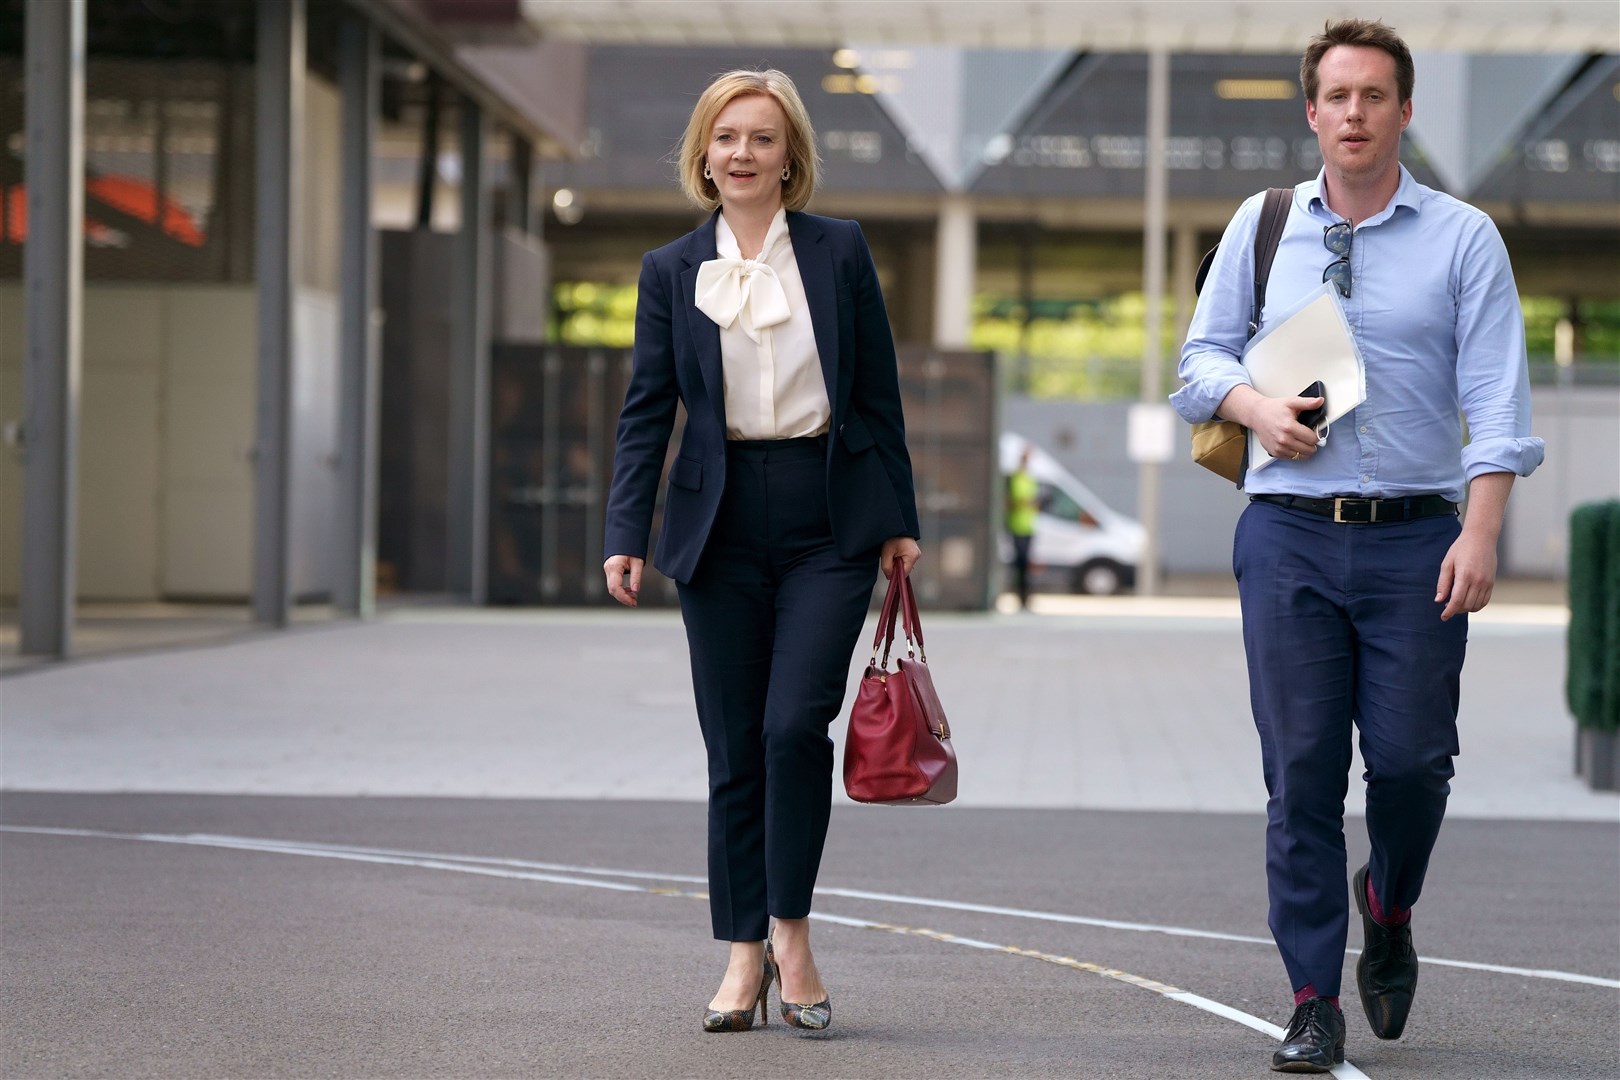 Liz Truss arrives at Here East studios in Stratford, east London, before the live Conservative Party leadership debate hosted by Channel 4 in July (Victoria Jones/PA)